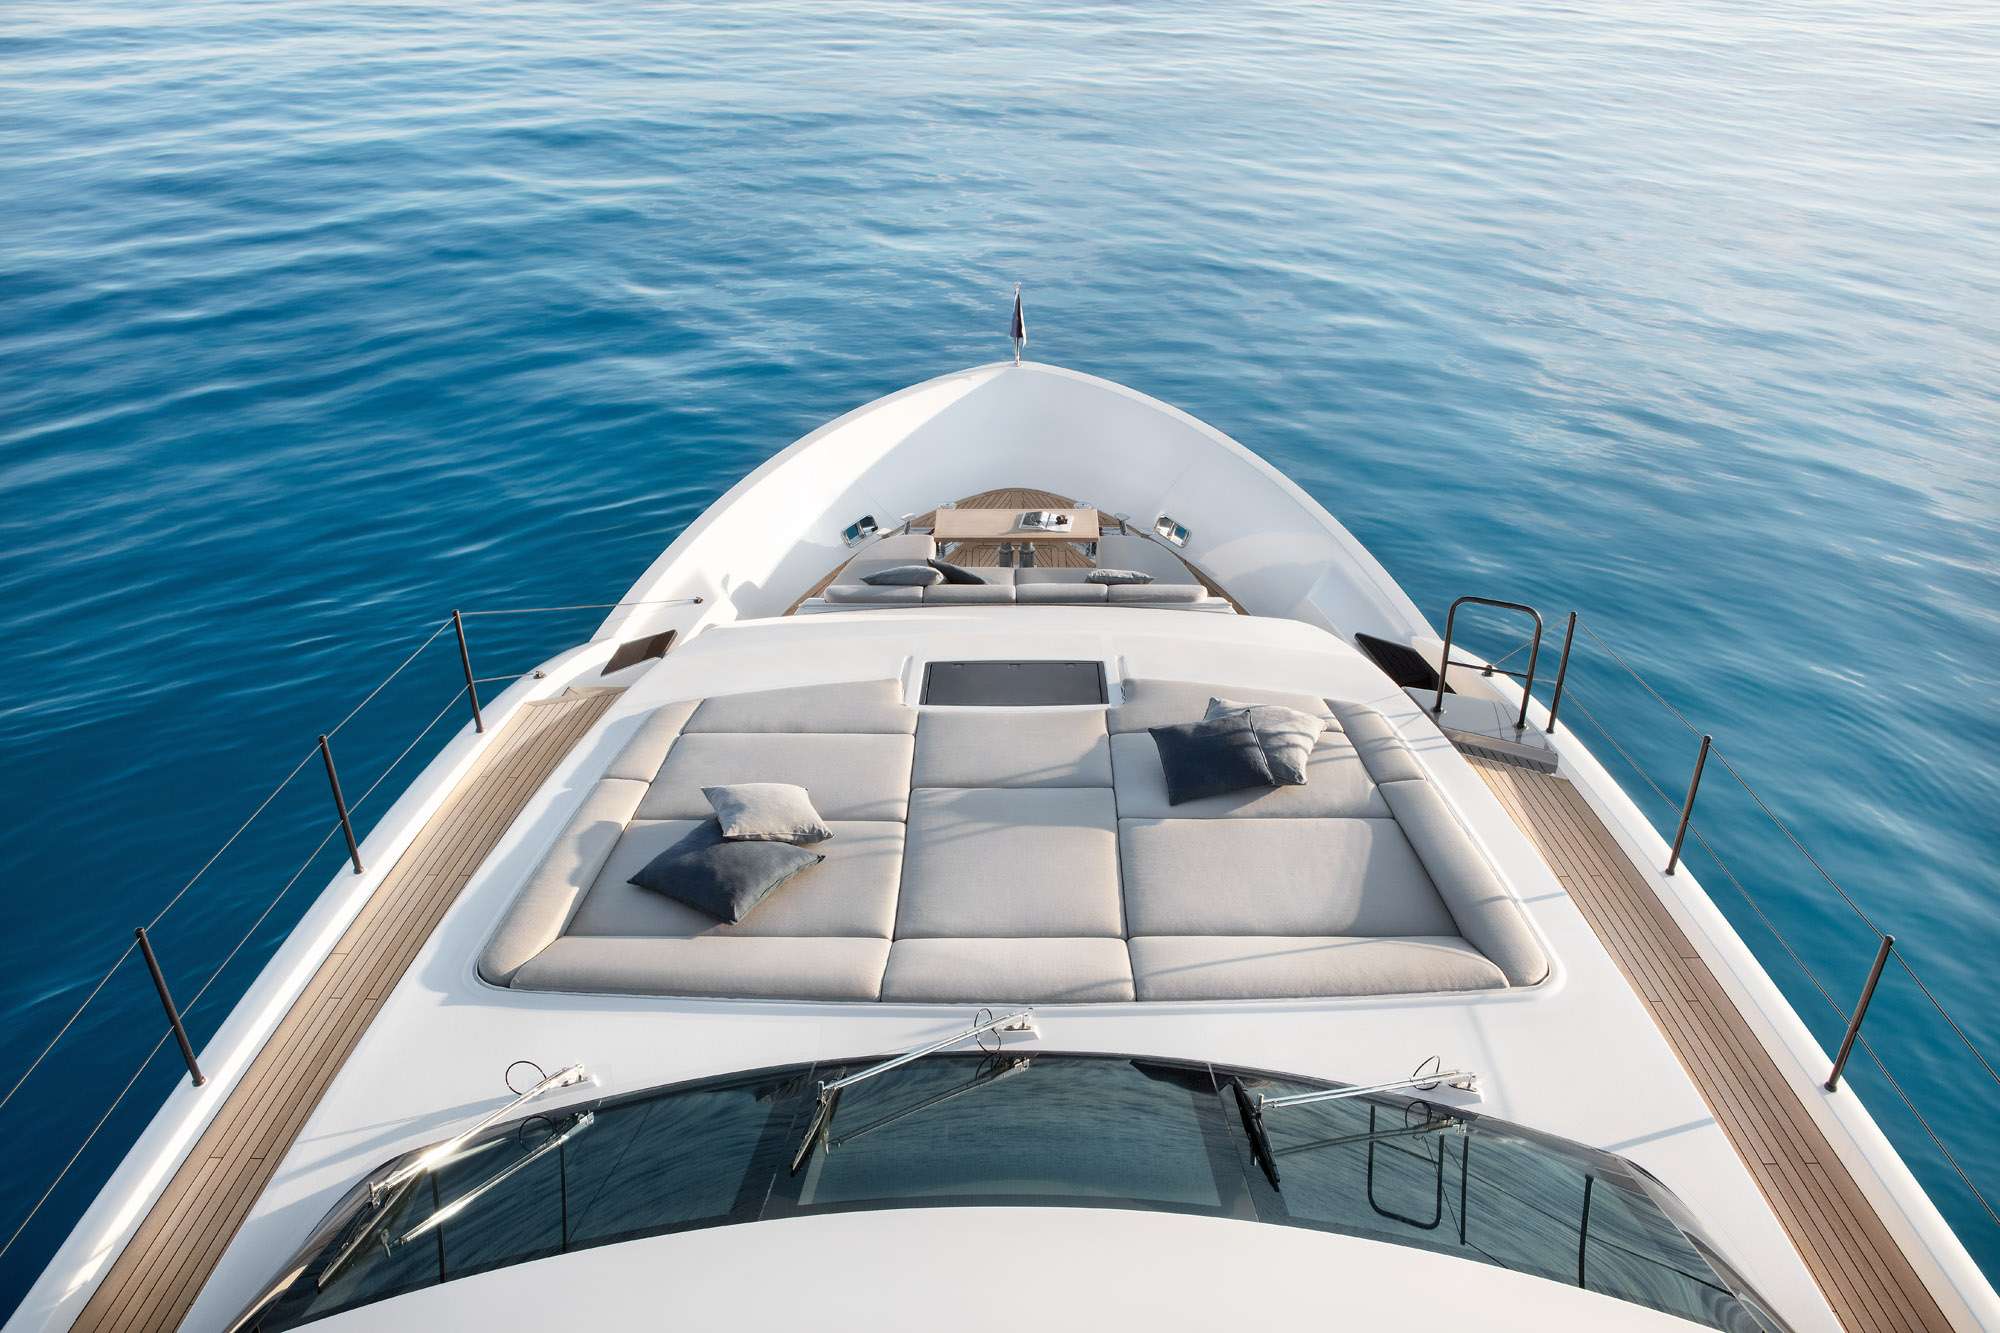 SEVEN - Yacht Charter Cambrils & Boat hire in Balearics & Spain 6